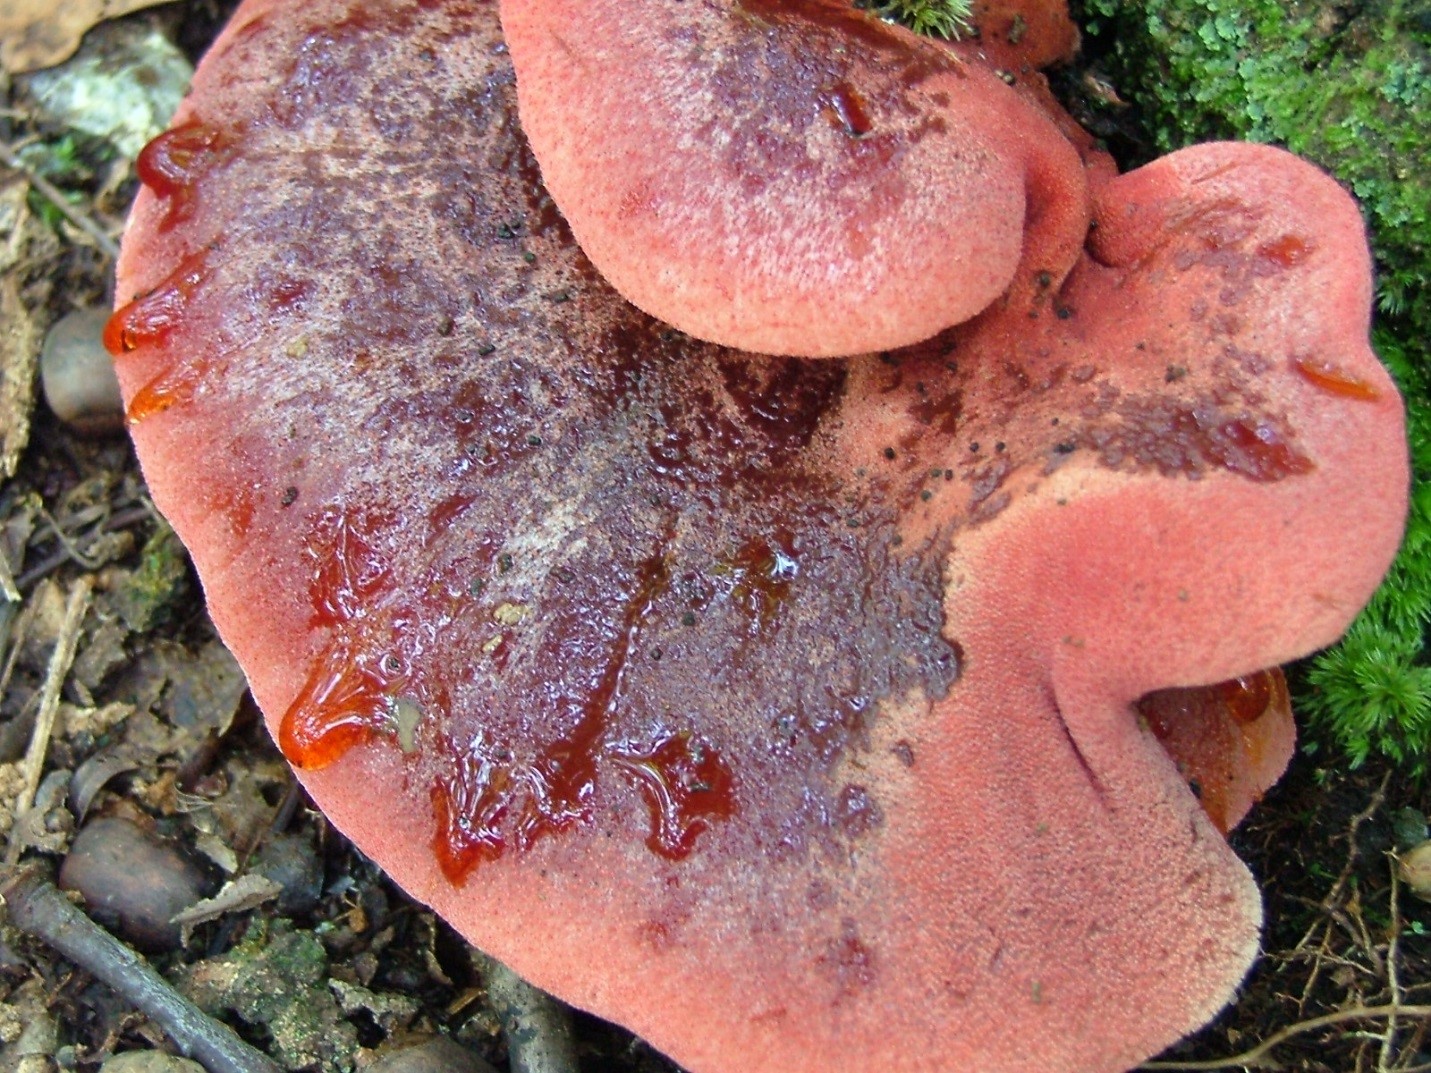 Photograph 4. Some wood decay fungi are rare on urban trees and also relatively rare in forest habitats. Fistulina hepatica is easy to identify given the appearance of its fruiting structure, but is rarely found on urban trees.